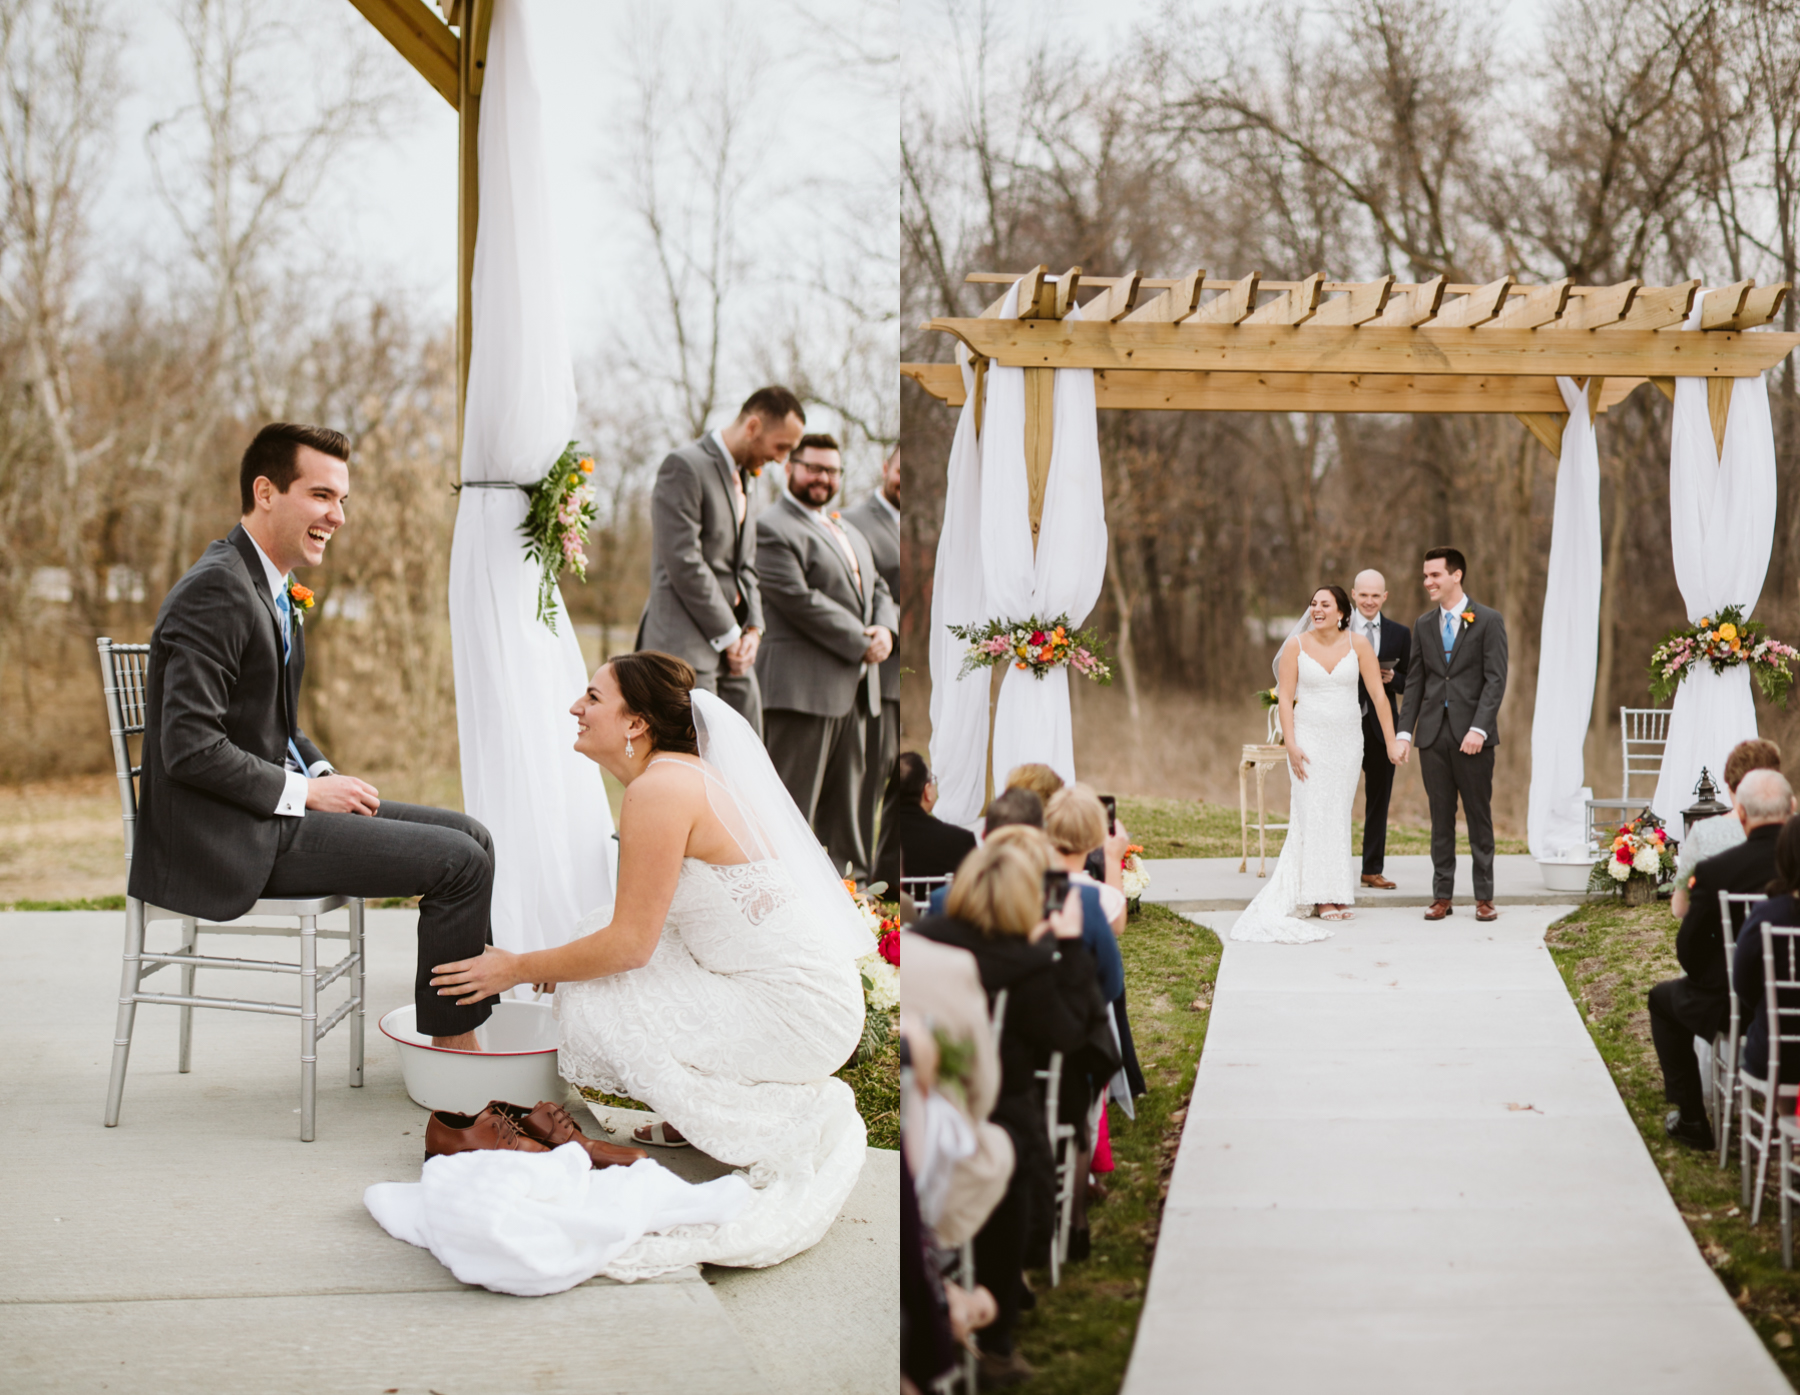 Bride and groom washing each other's feet at the stone house of st charles wedding venue in missouri